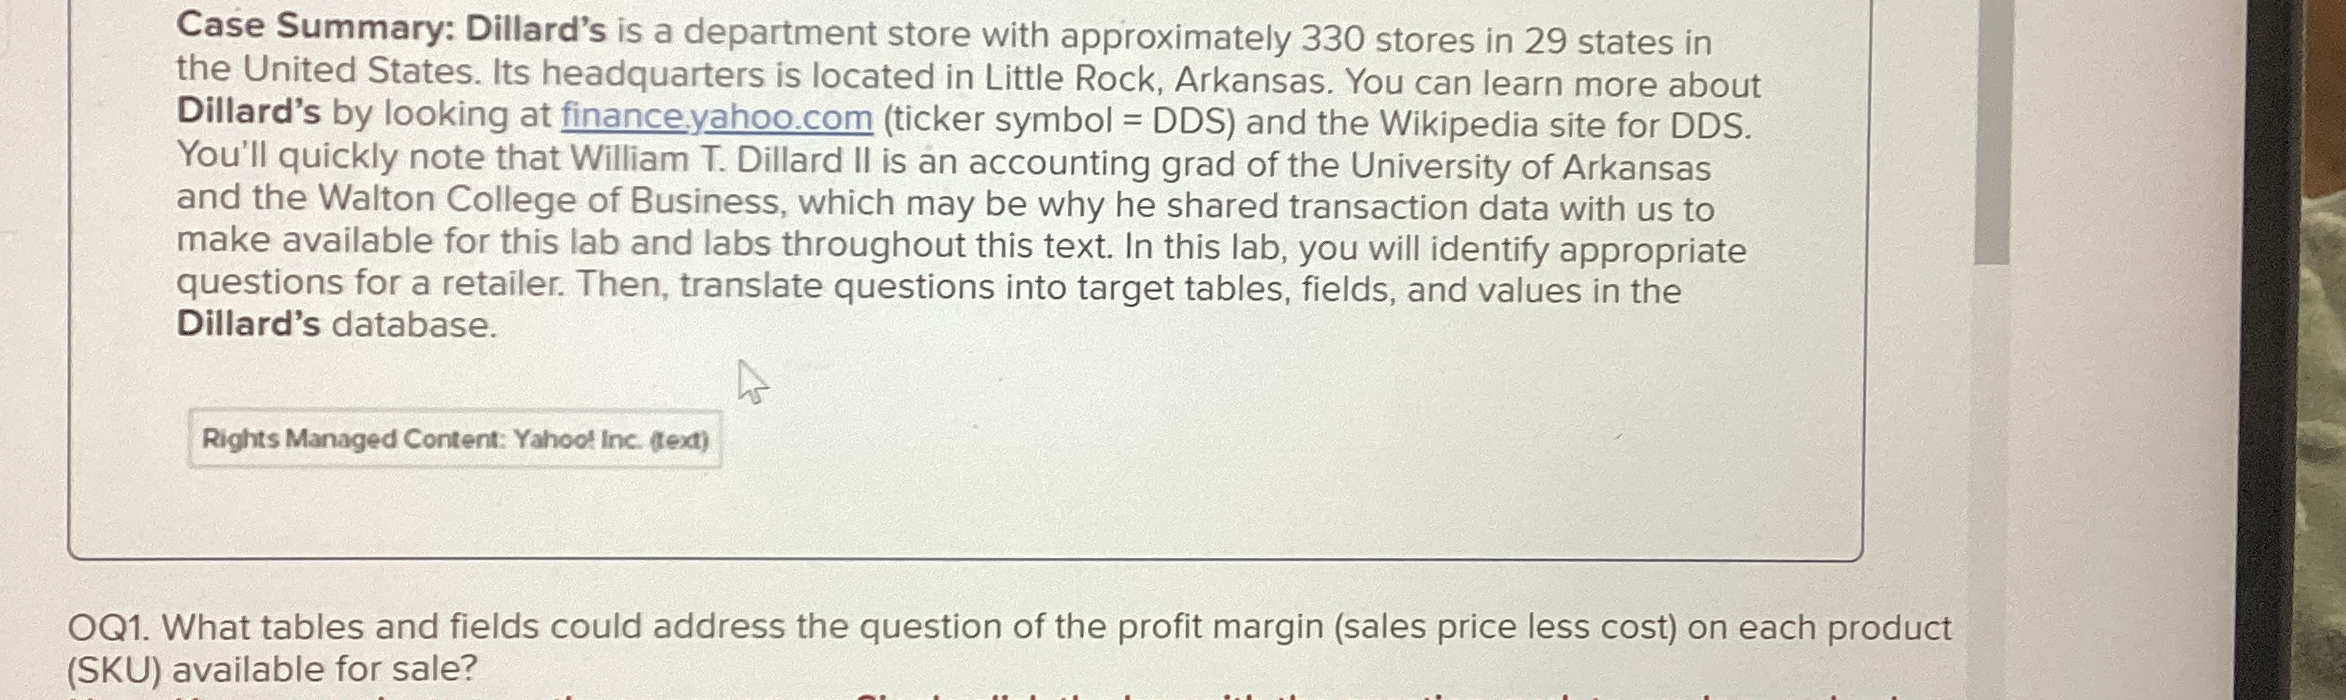 Solved Case Summary: Dillard's is a department store with | Chegg.com